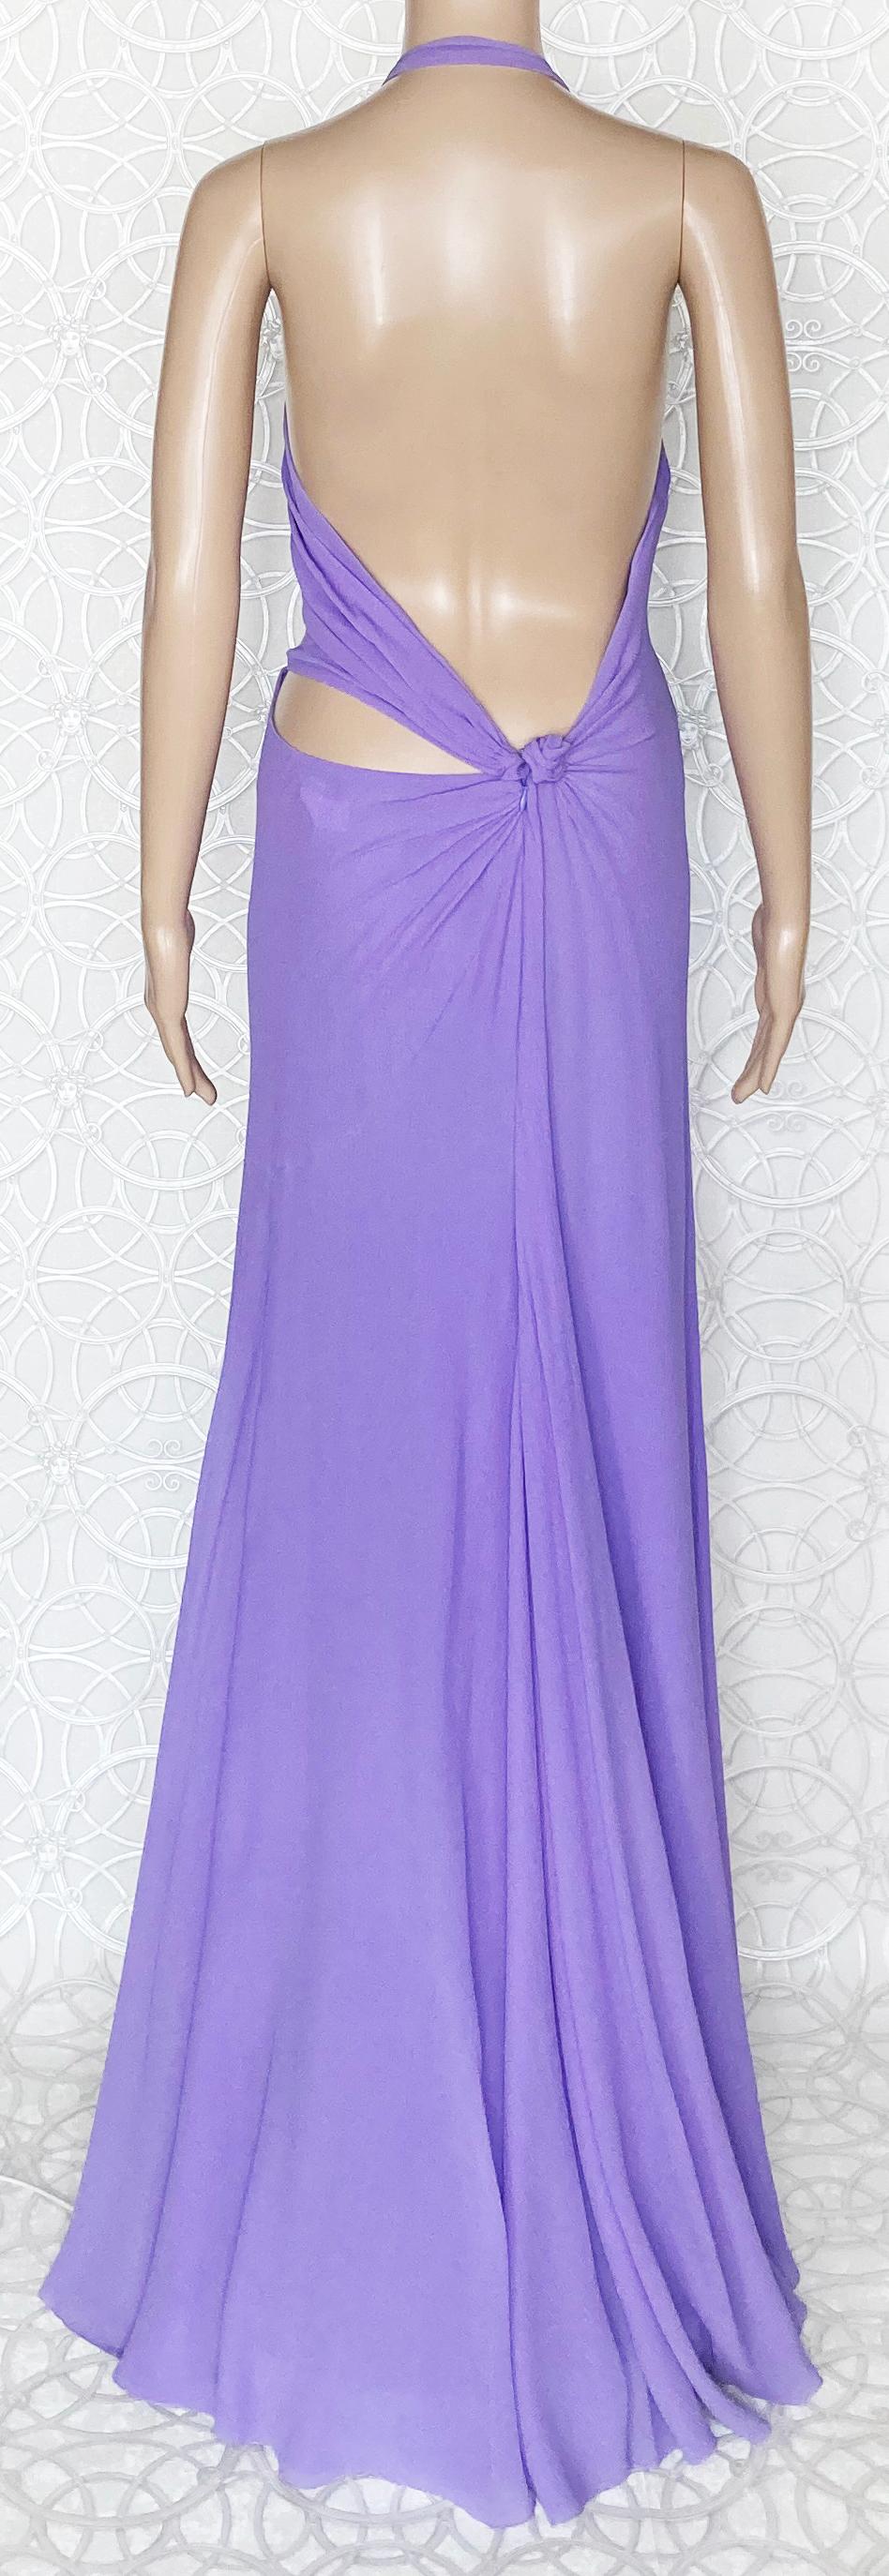 VINTAGE GIANNI VERSACE COUTURE OPEN BACK LILAC SILK DRESS Size 42 - 6 7